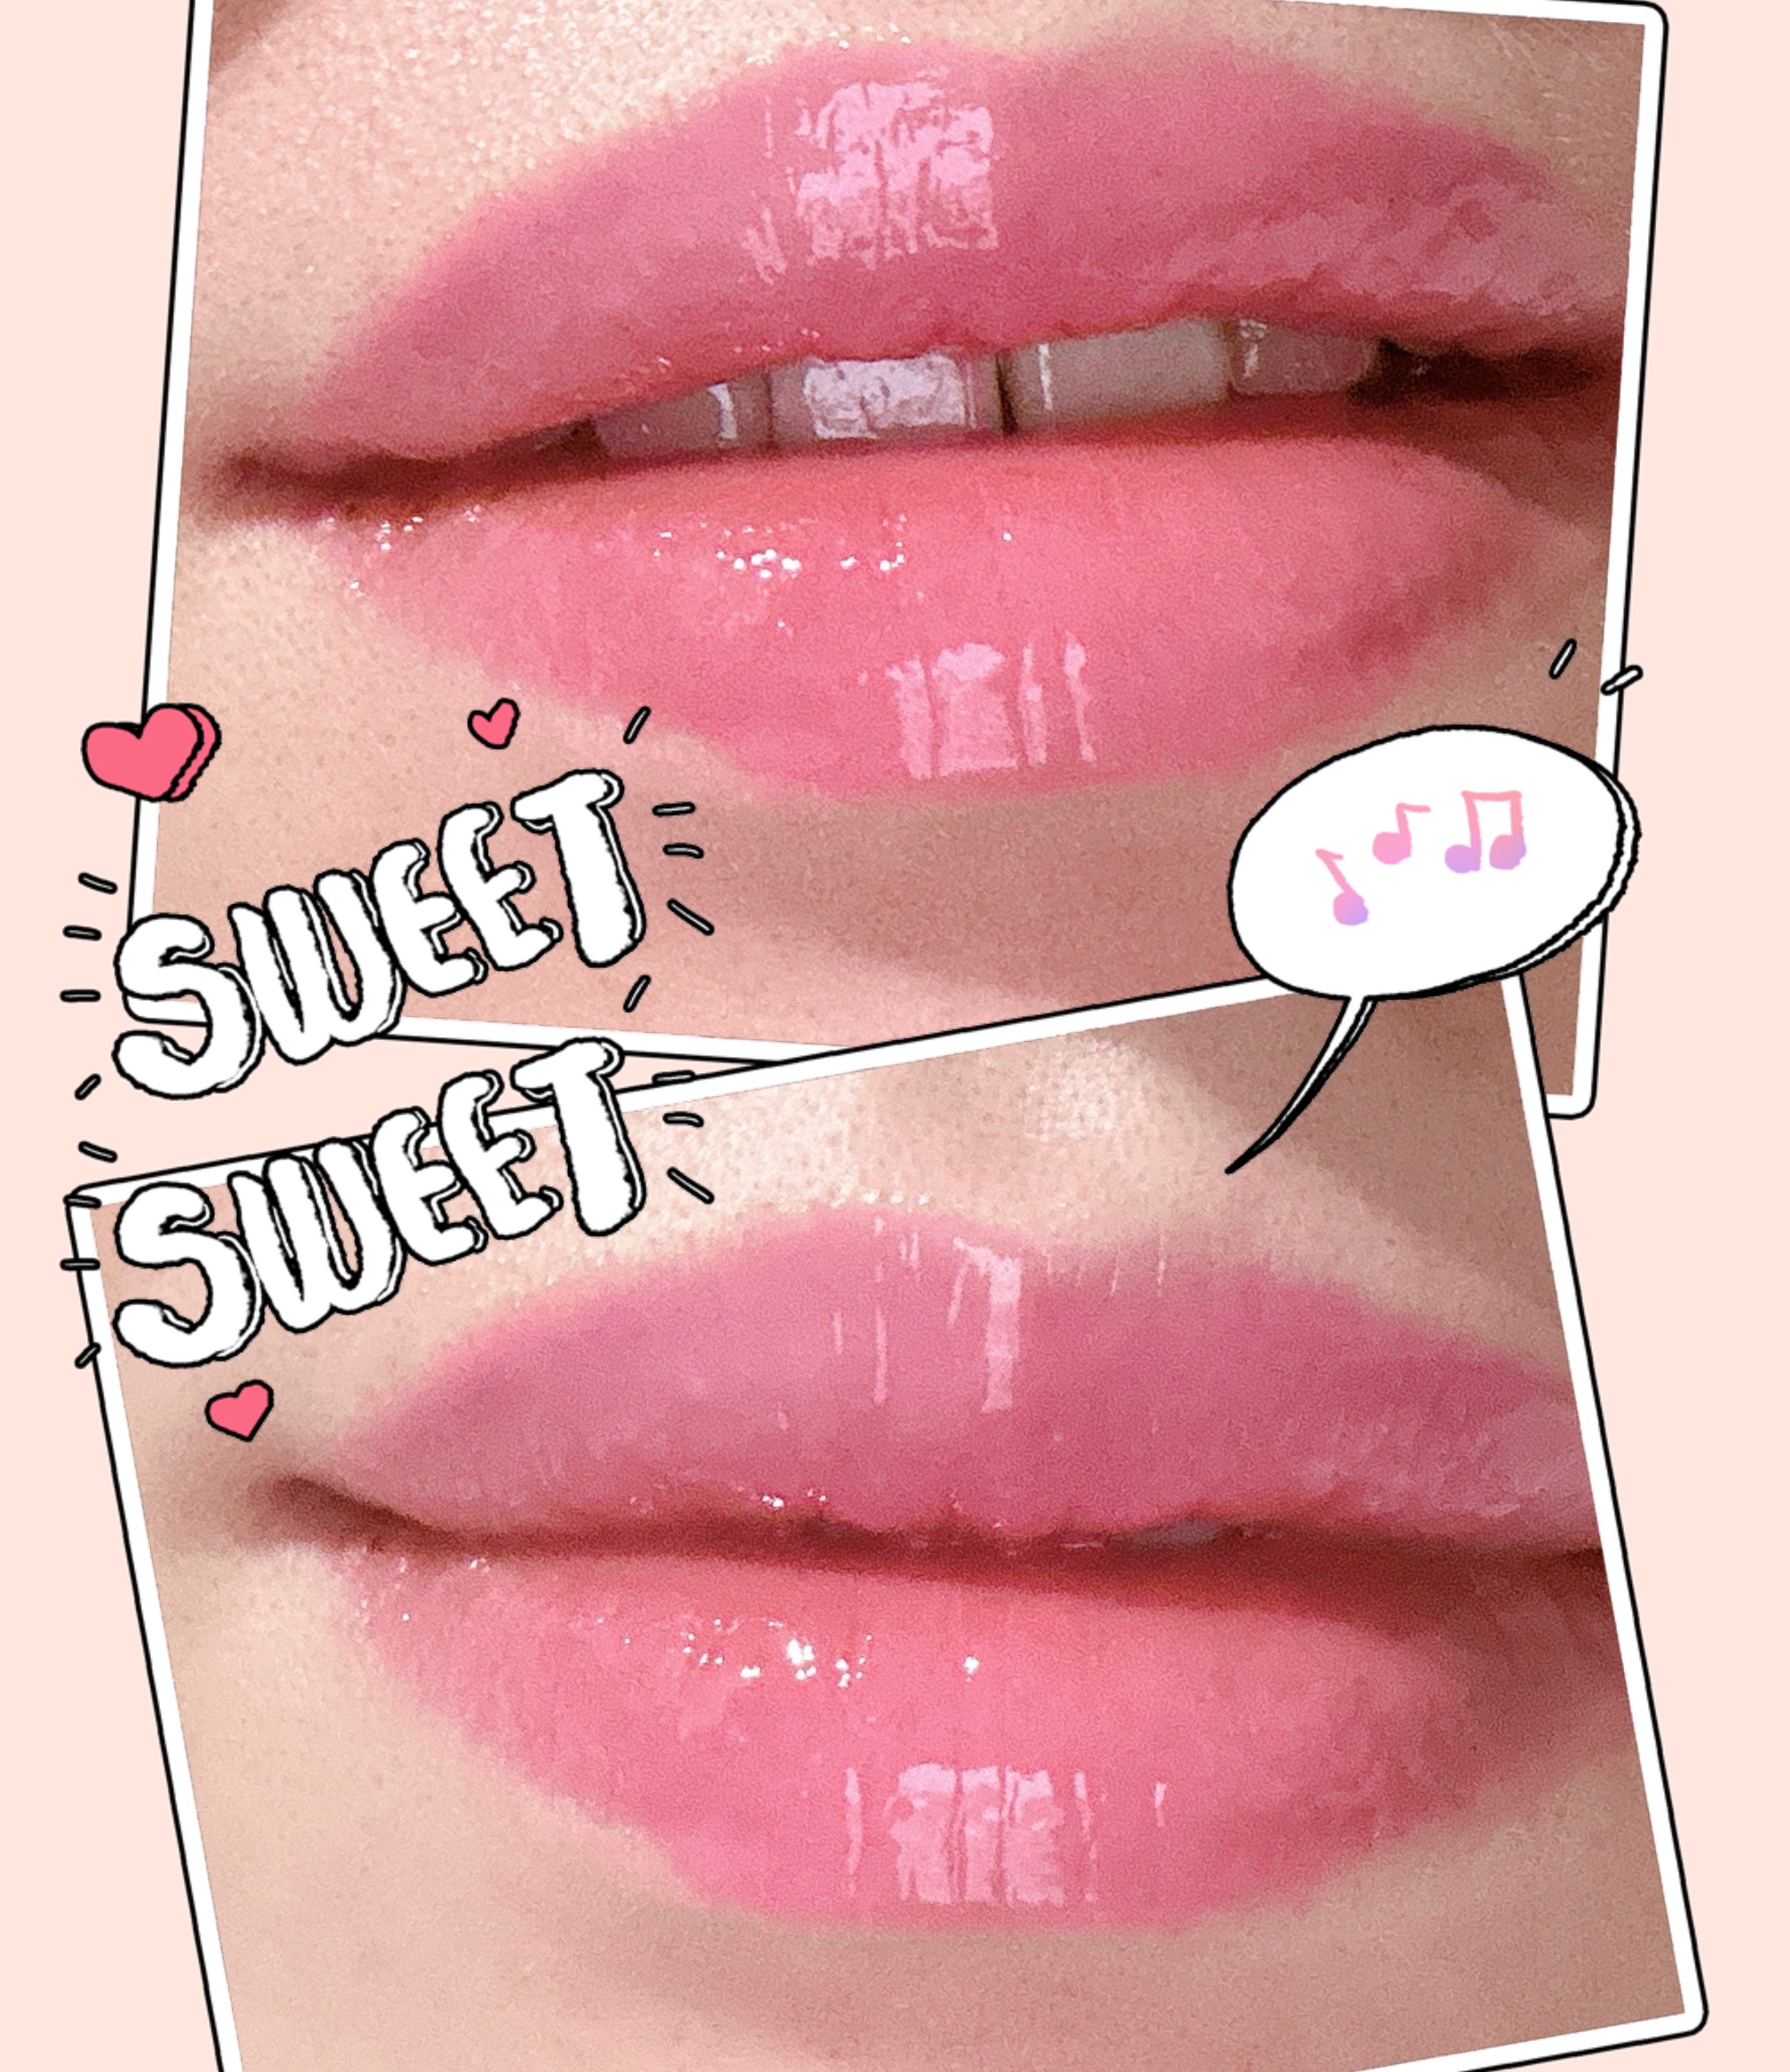 Sweet Rose lipgloss, Rosy nude watermelon scented lipgloss, high shine lipgloss